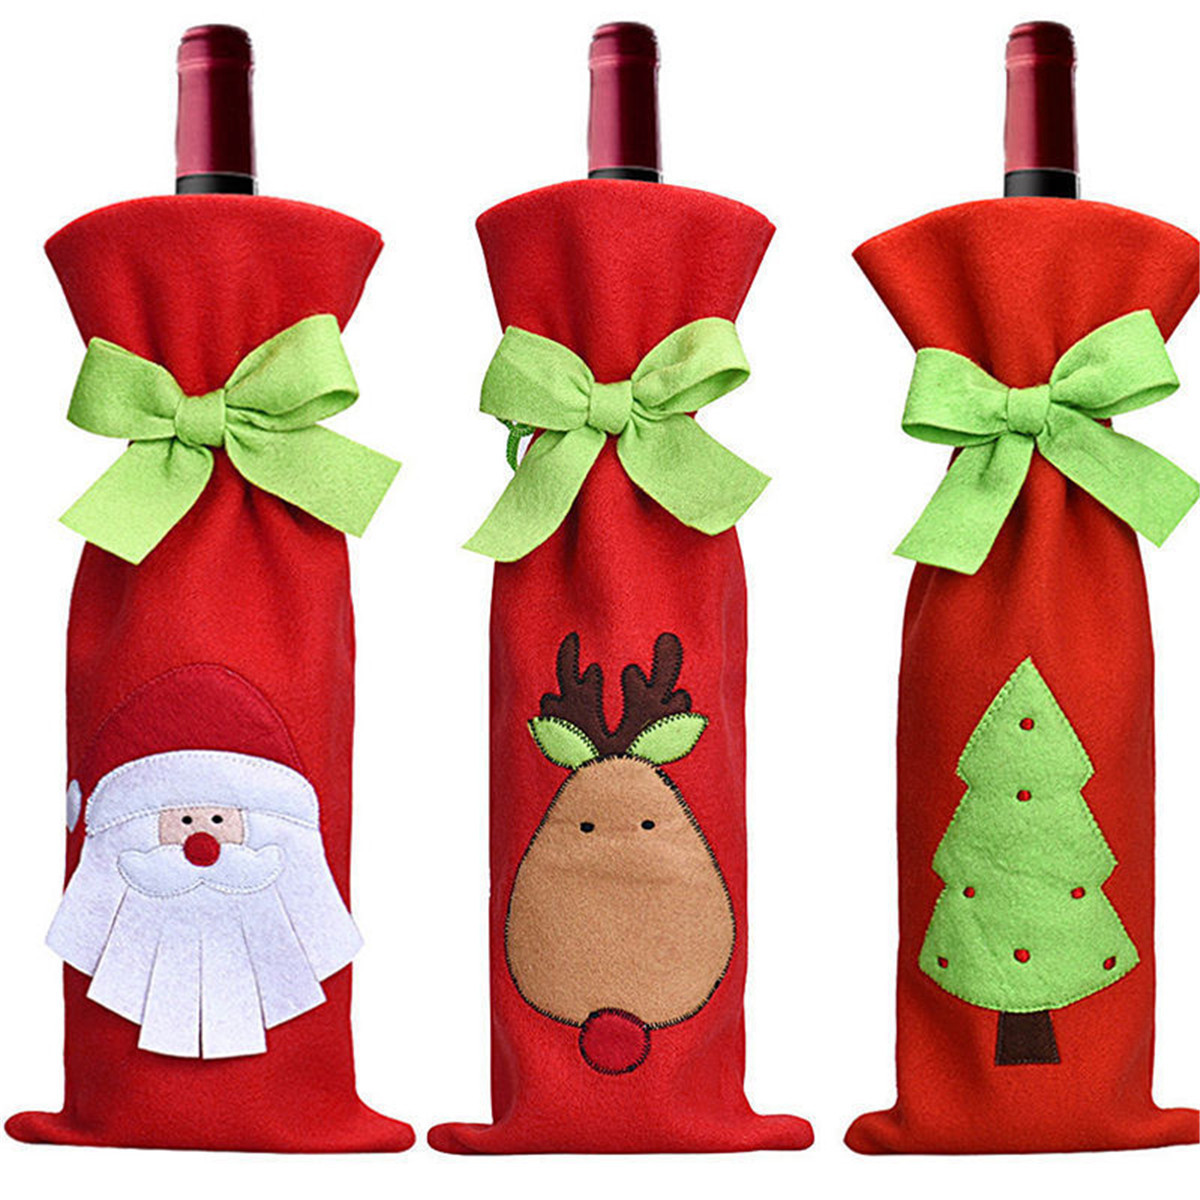 Christmas-Decoration-Red-Santa-Tree-Elk-Wine-Bottle-Cover-Bags-Dinner-Party-Gift-1103637-4